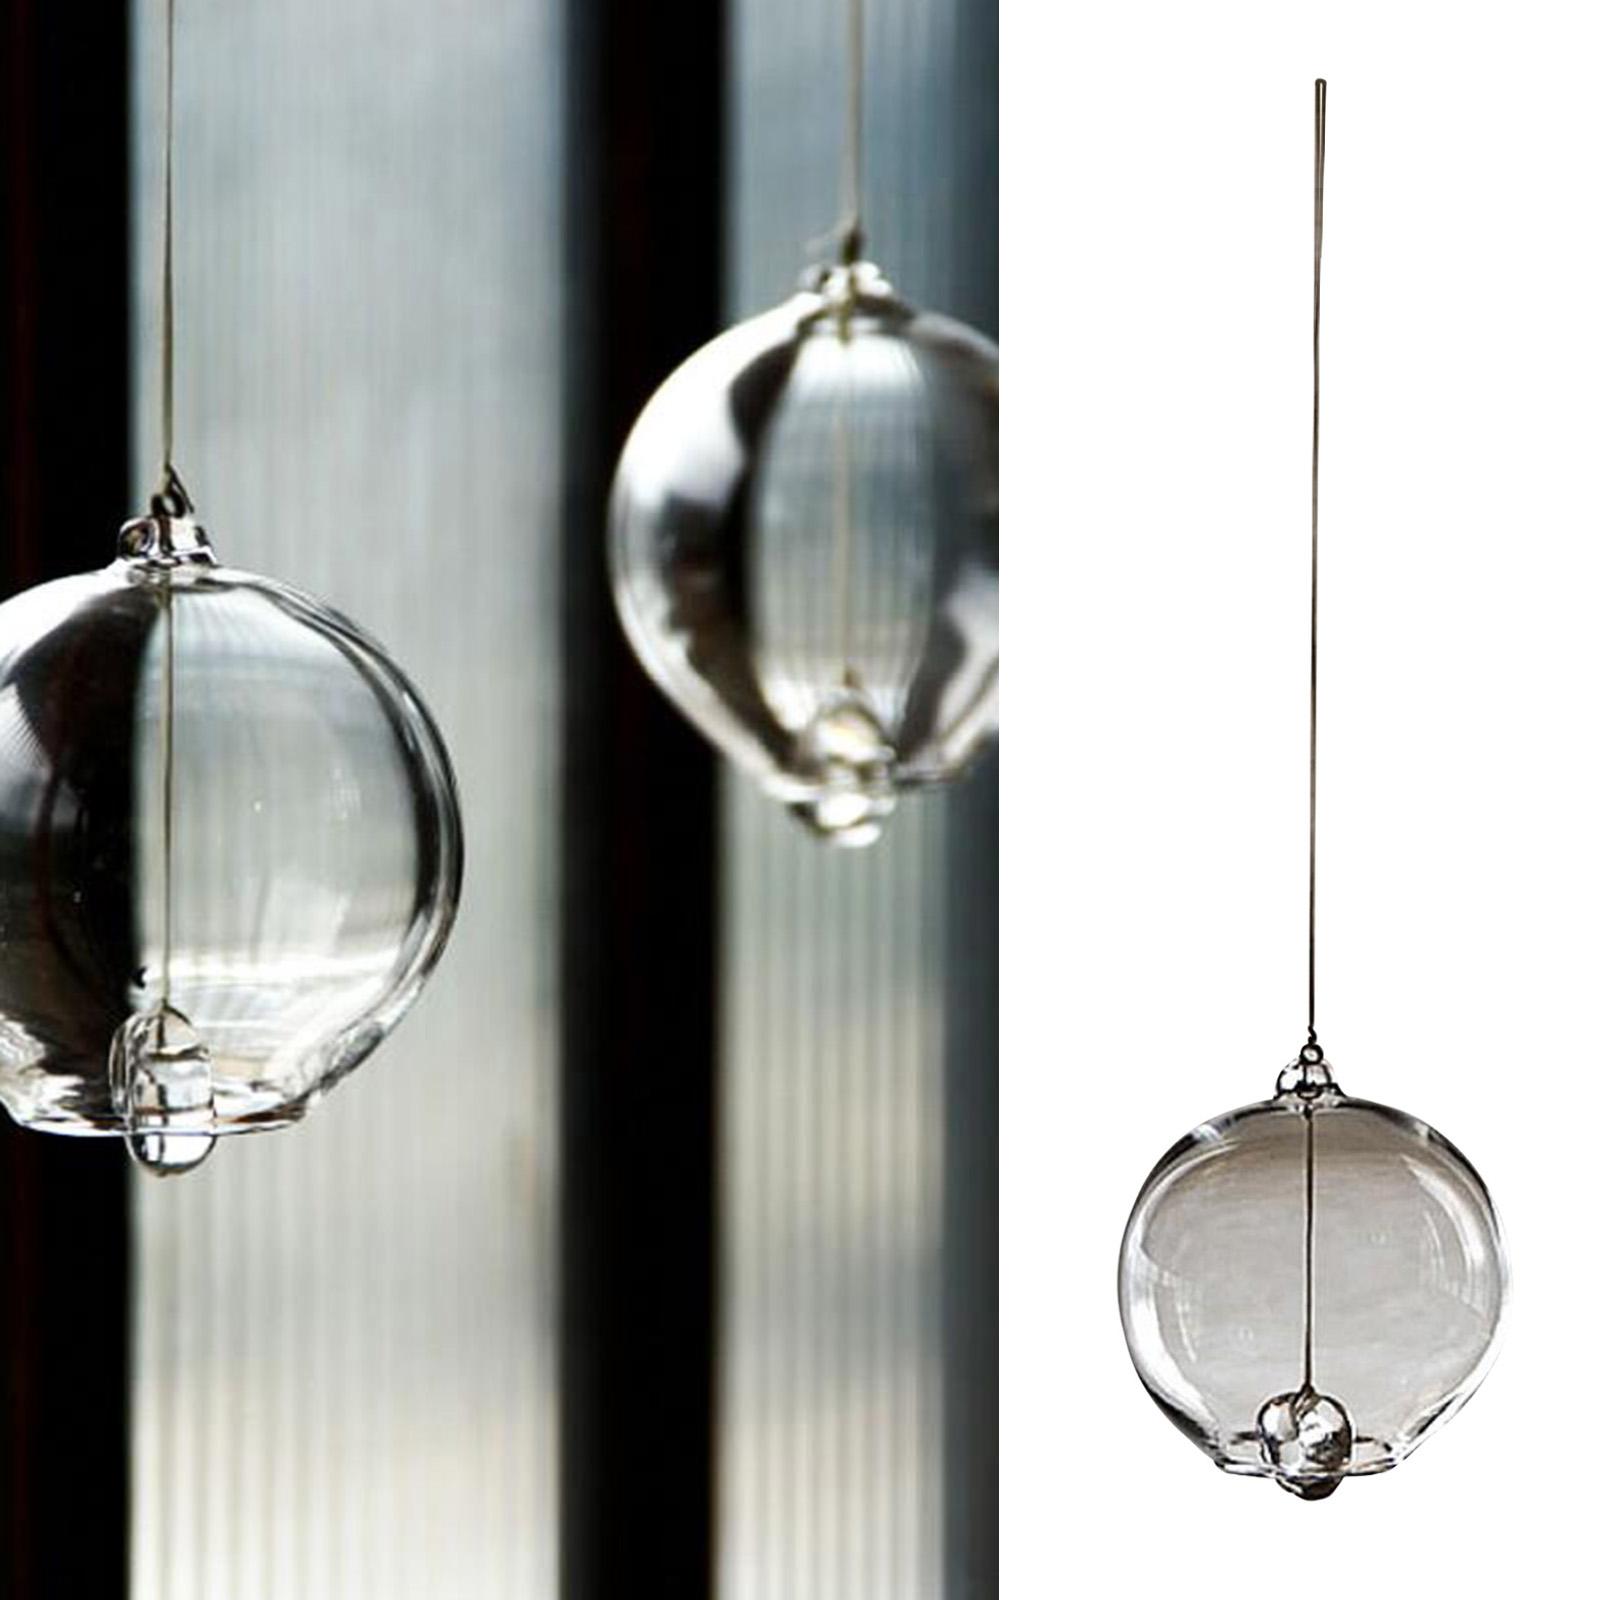 2xJapanese Glass Wind Chime Bell Indoor Hanging Decoration Pendant Craft Gift